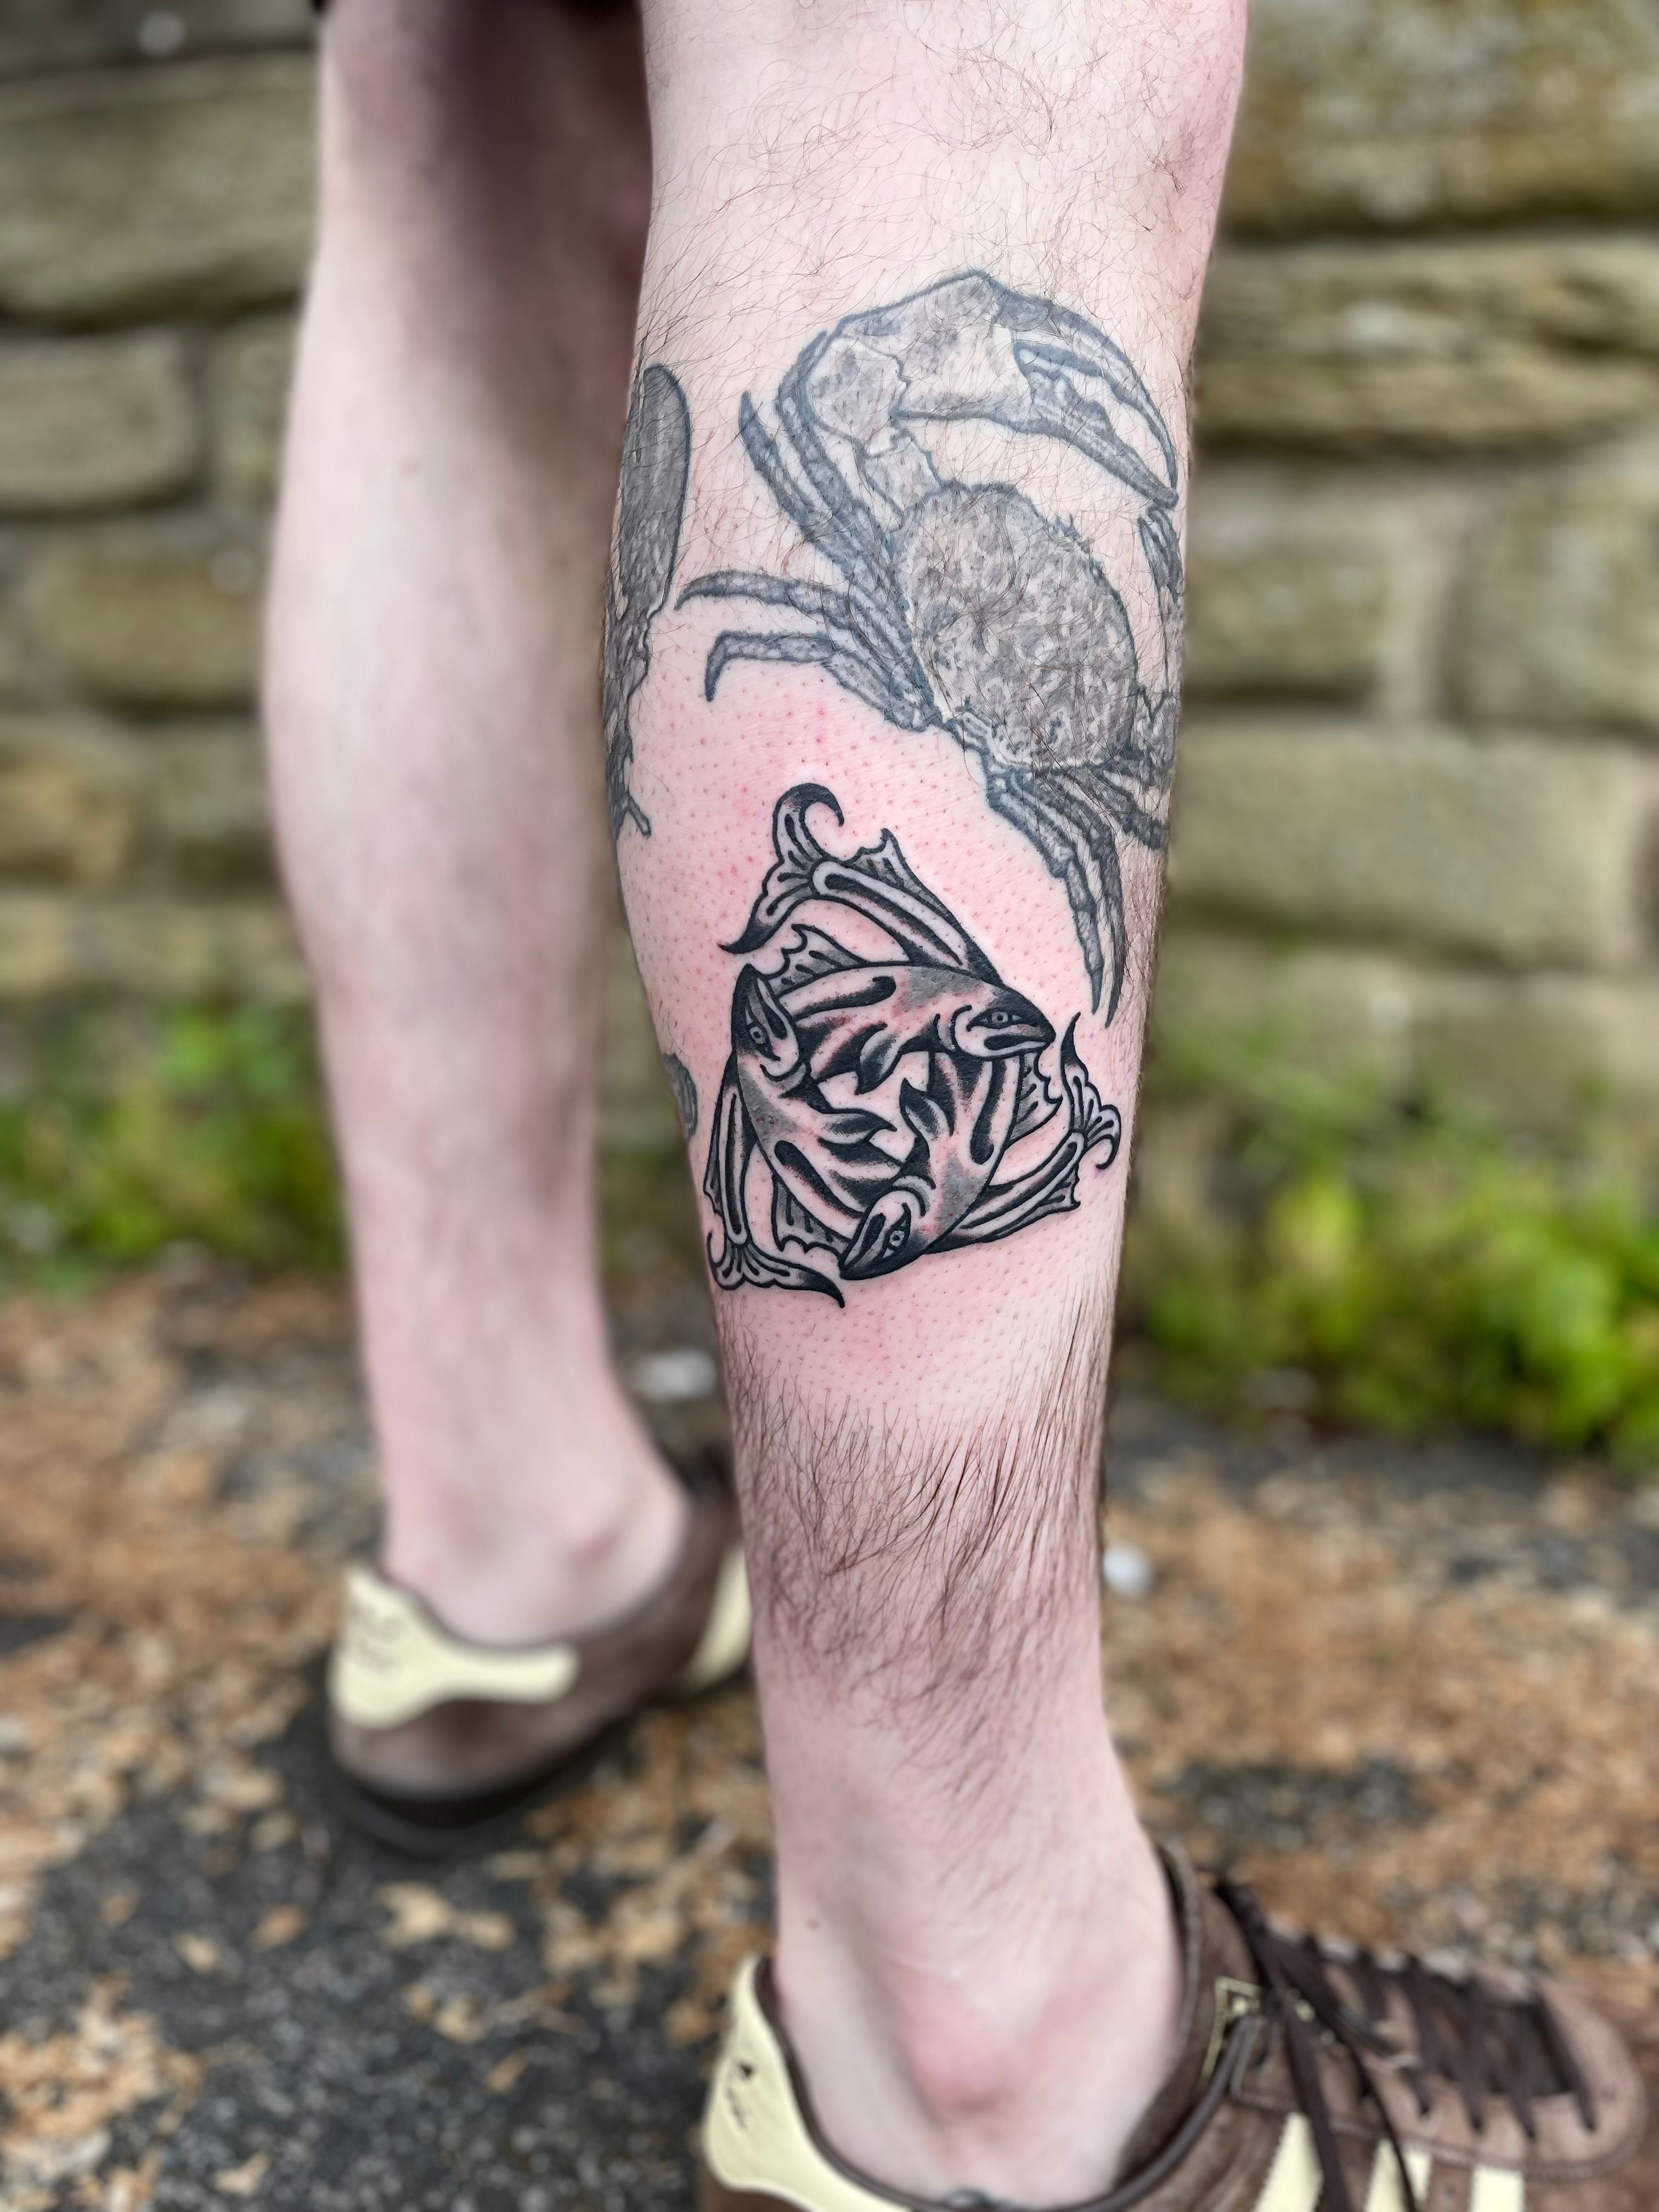 What do you think about тnorse pagan tattoos? : r/NorsePaganism